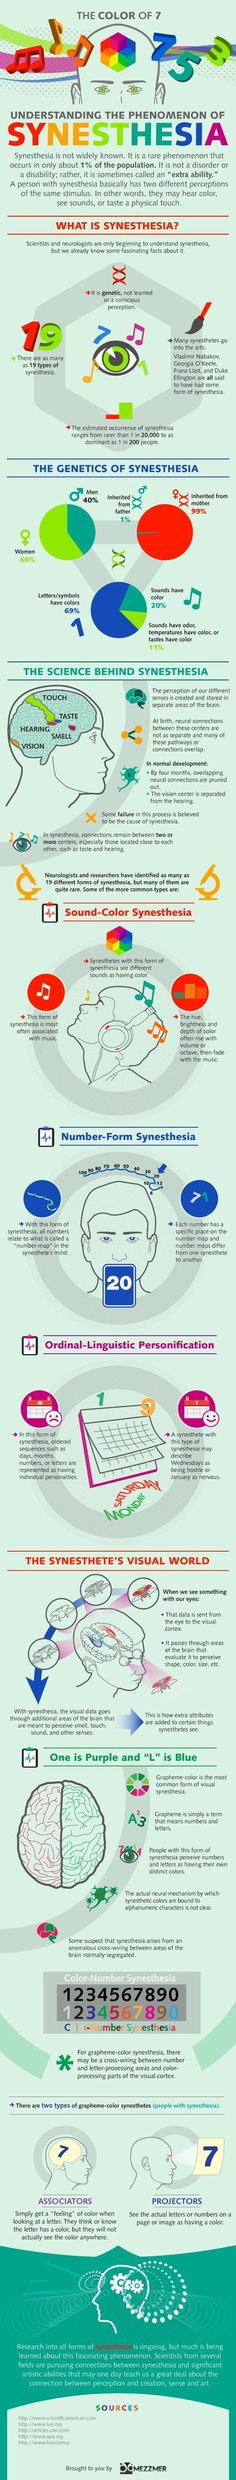 Best Synesthesia Image Psicologia Learning Styles Knowledge